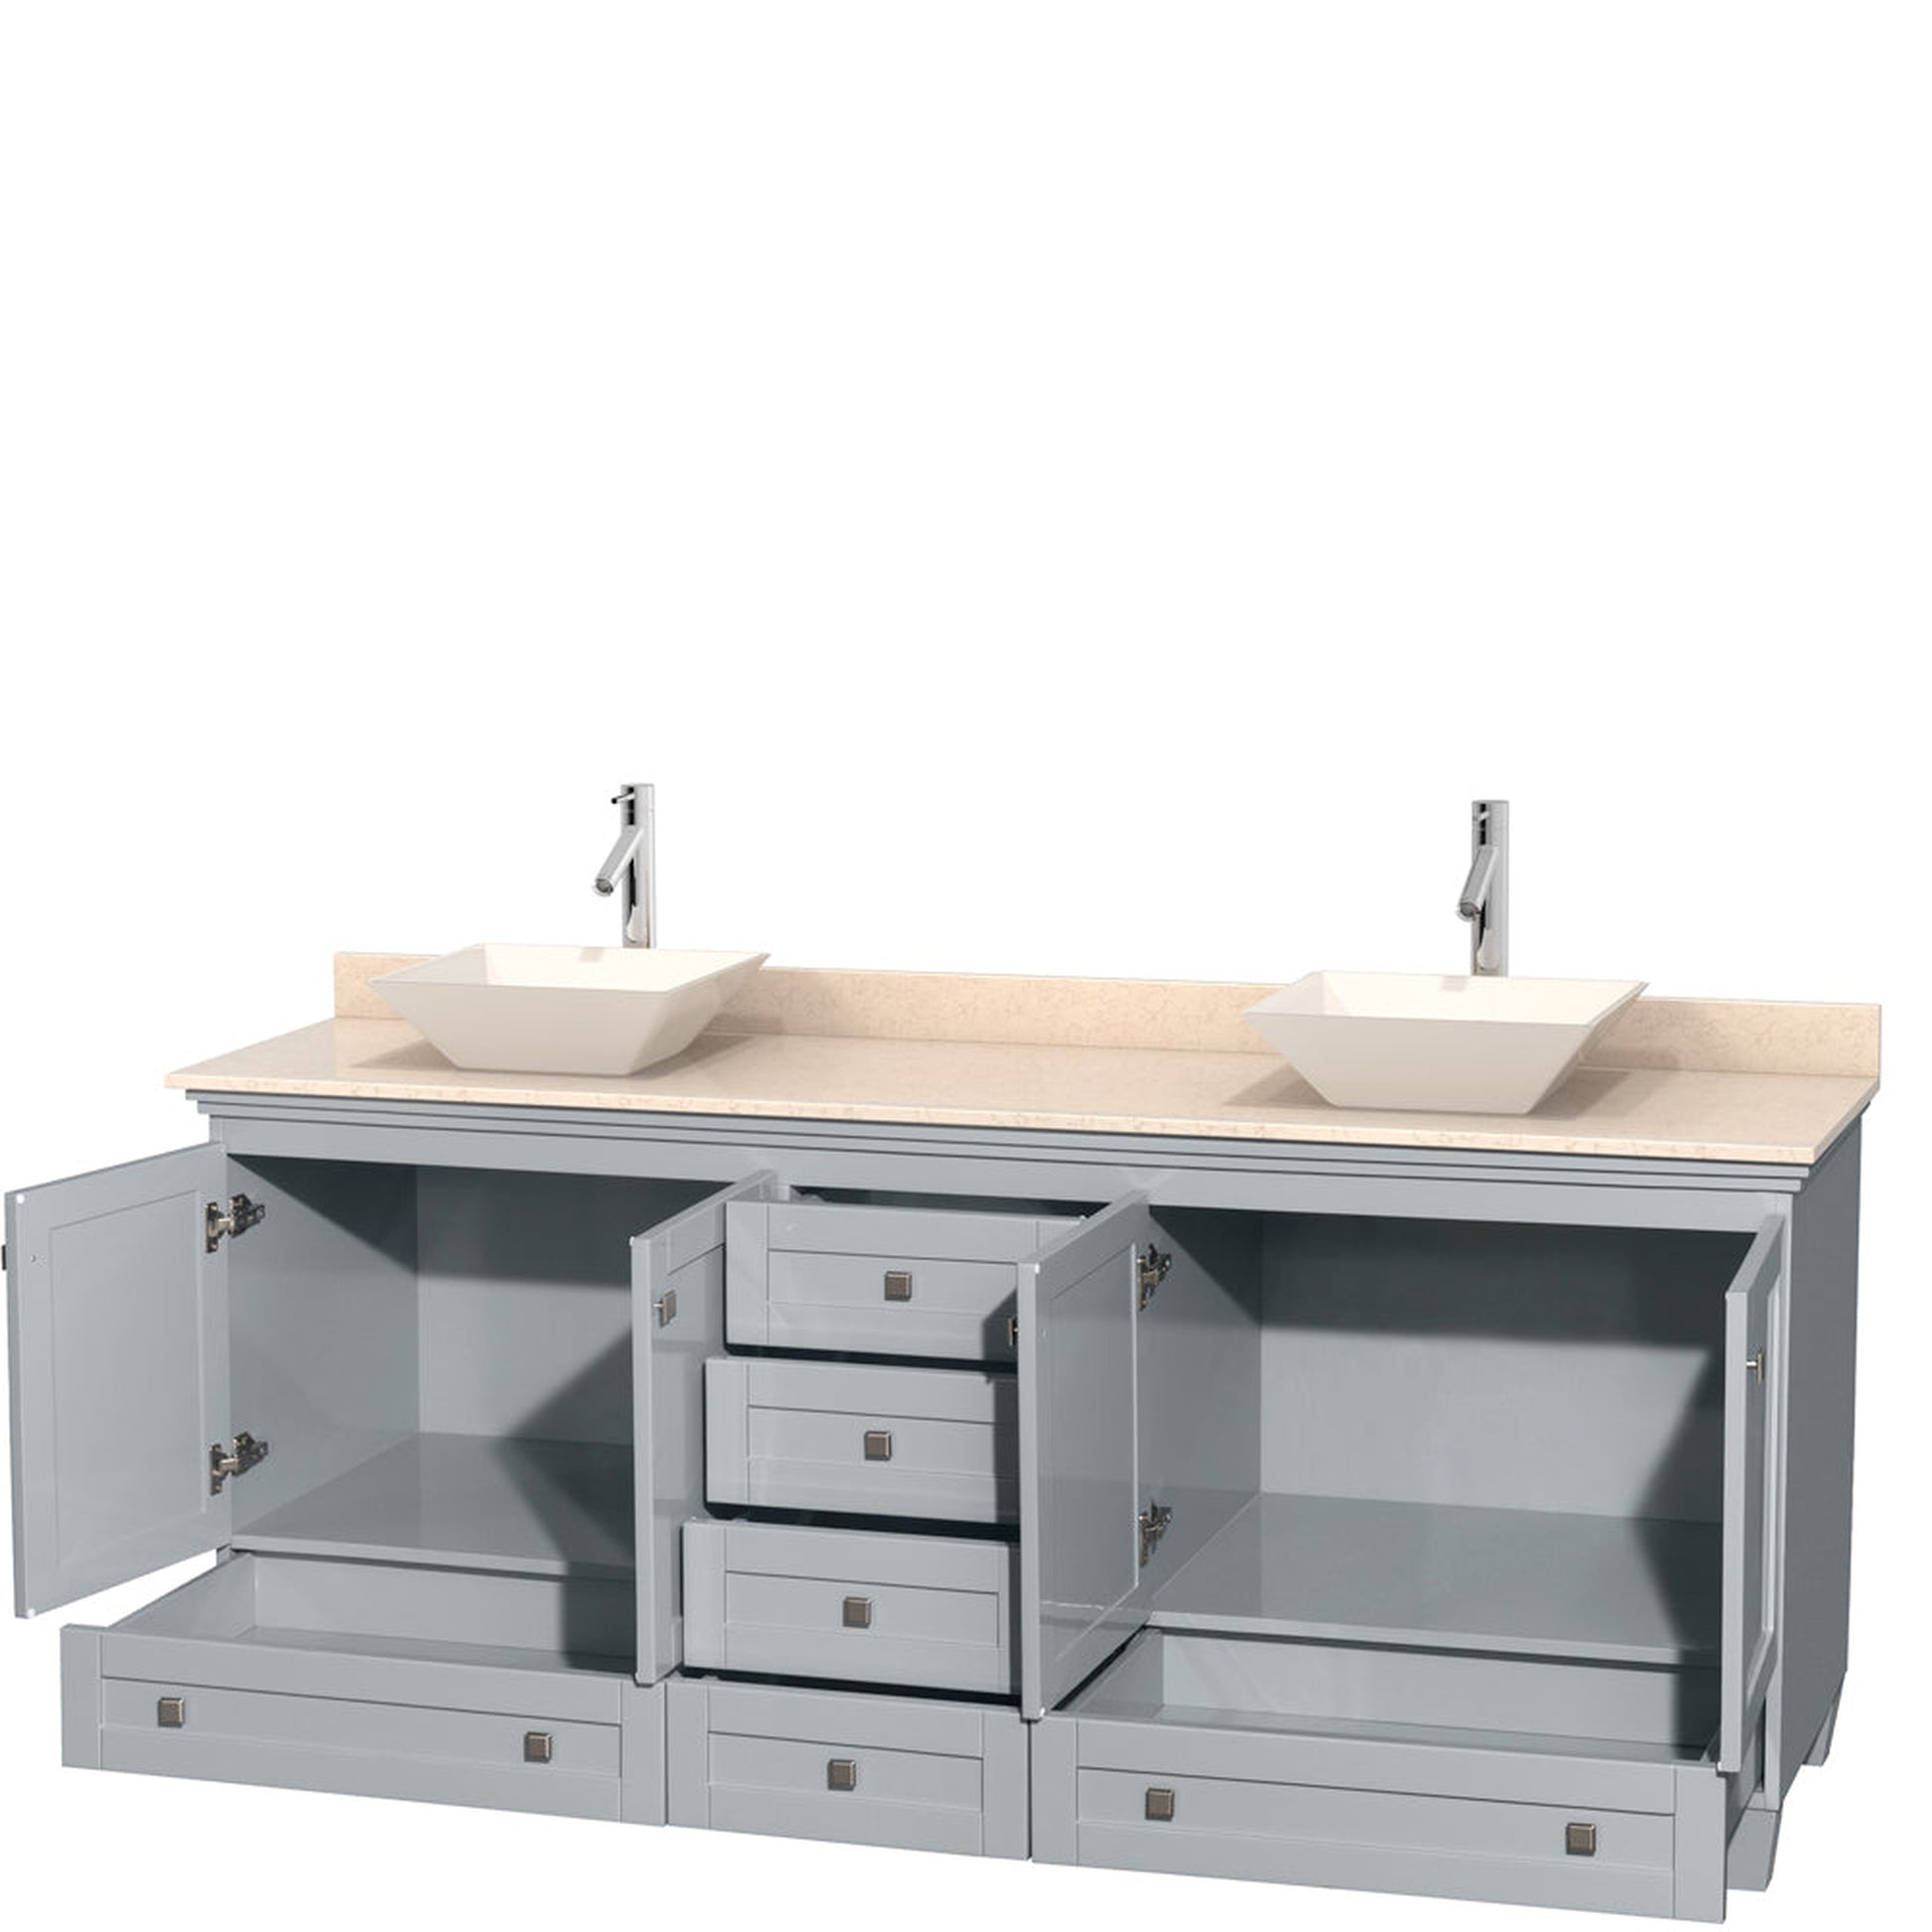 Wyndham Collection Acclaim 80" Double Bathroom Vanity in Oyster Gray With Ivory Marble Countertop & Pyra Bone Porcelain Sink